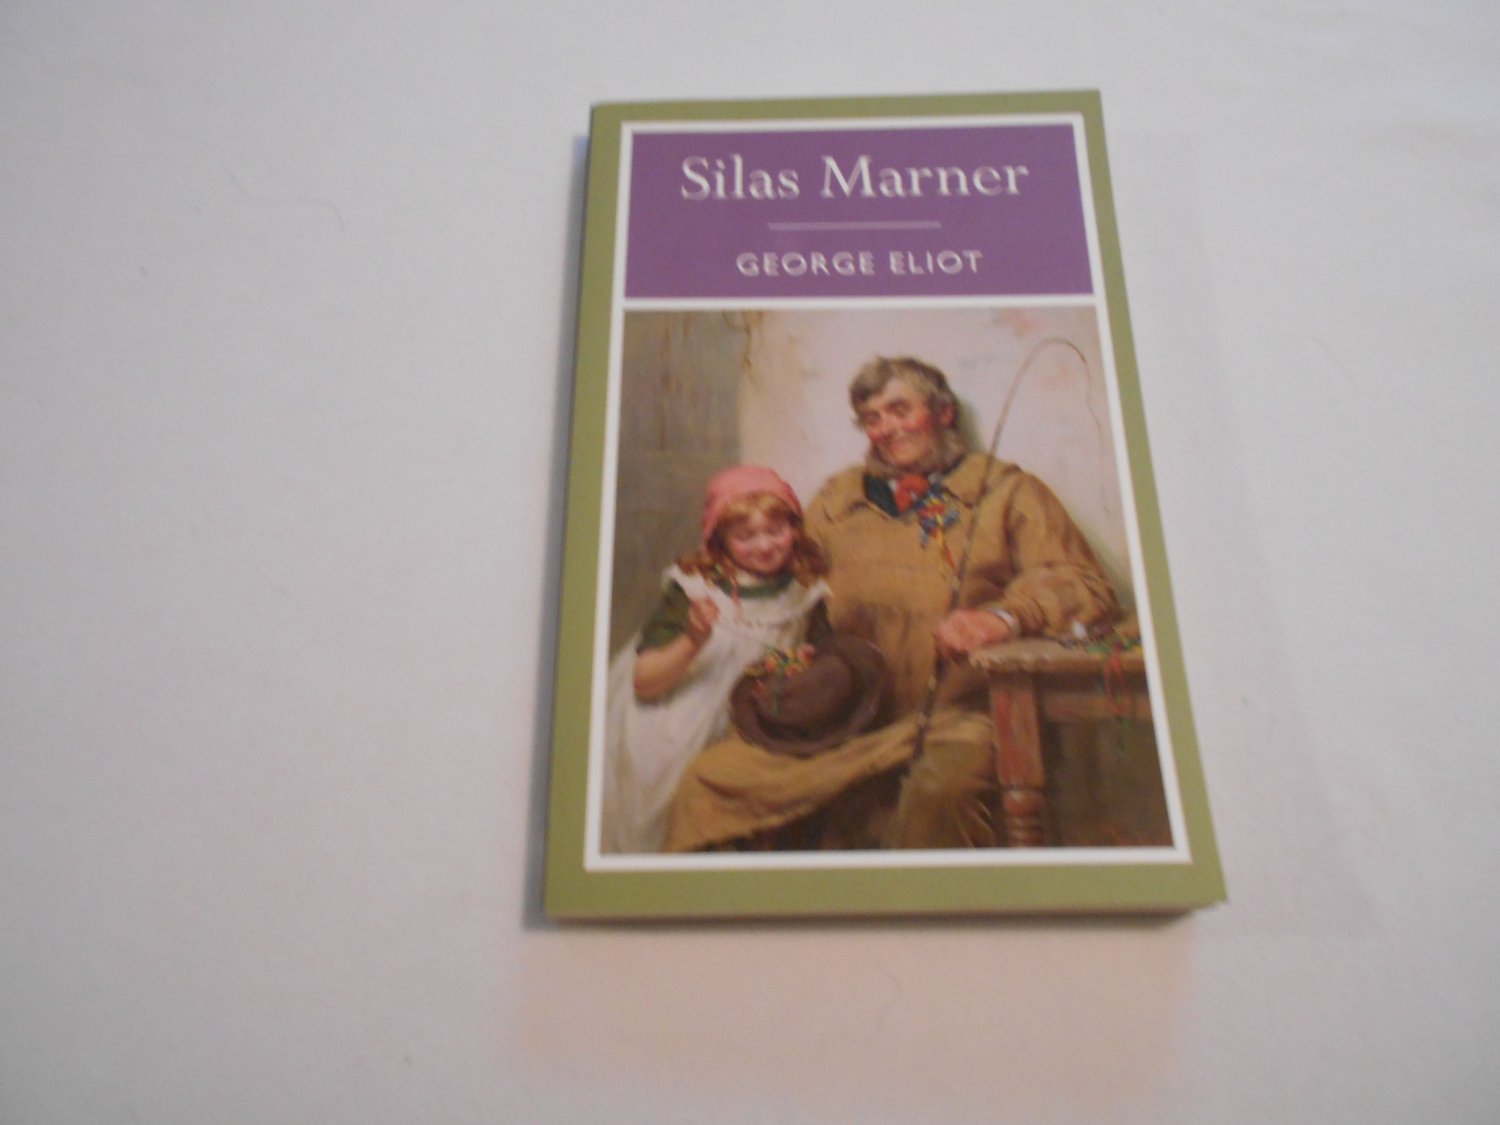 Silas Marner by George Eliot (2011) (B5) Classic Historical Fiction